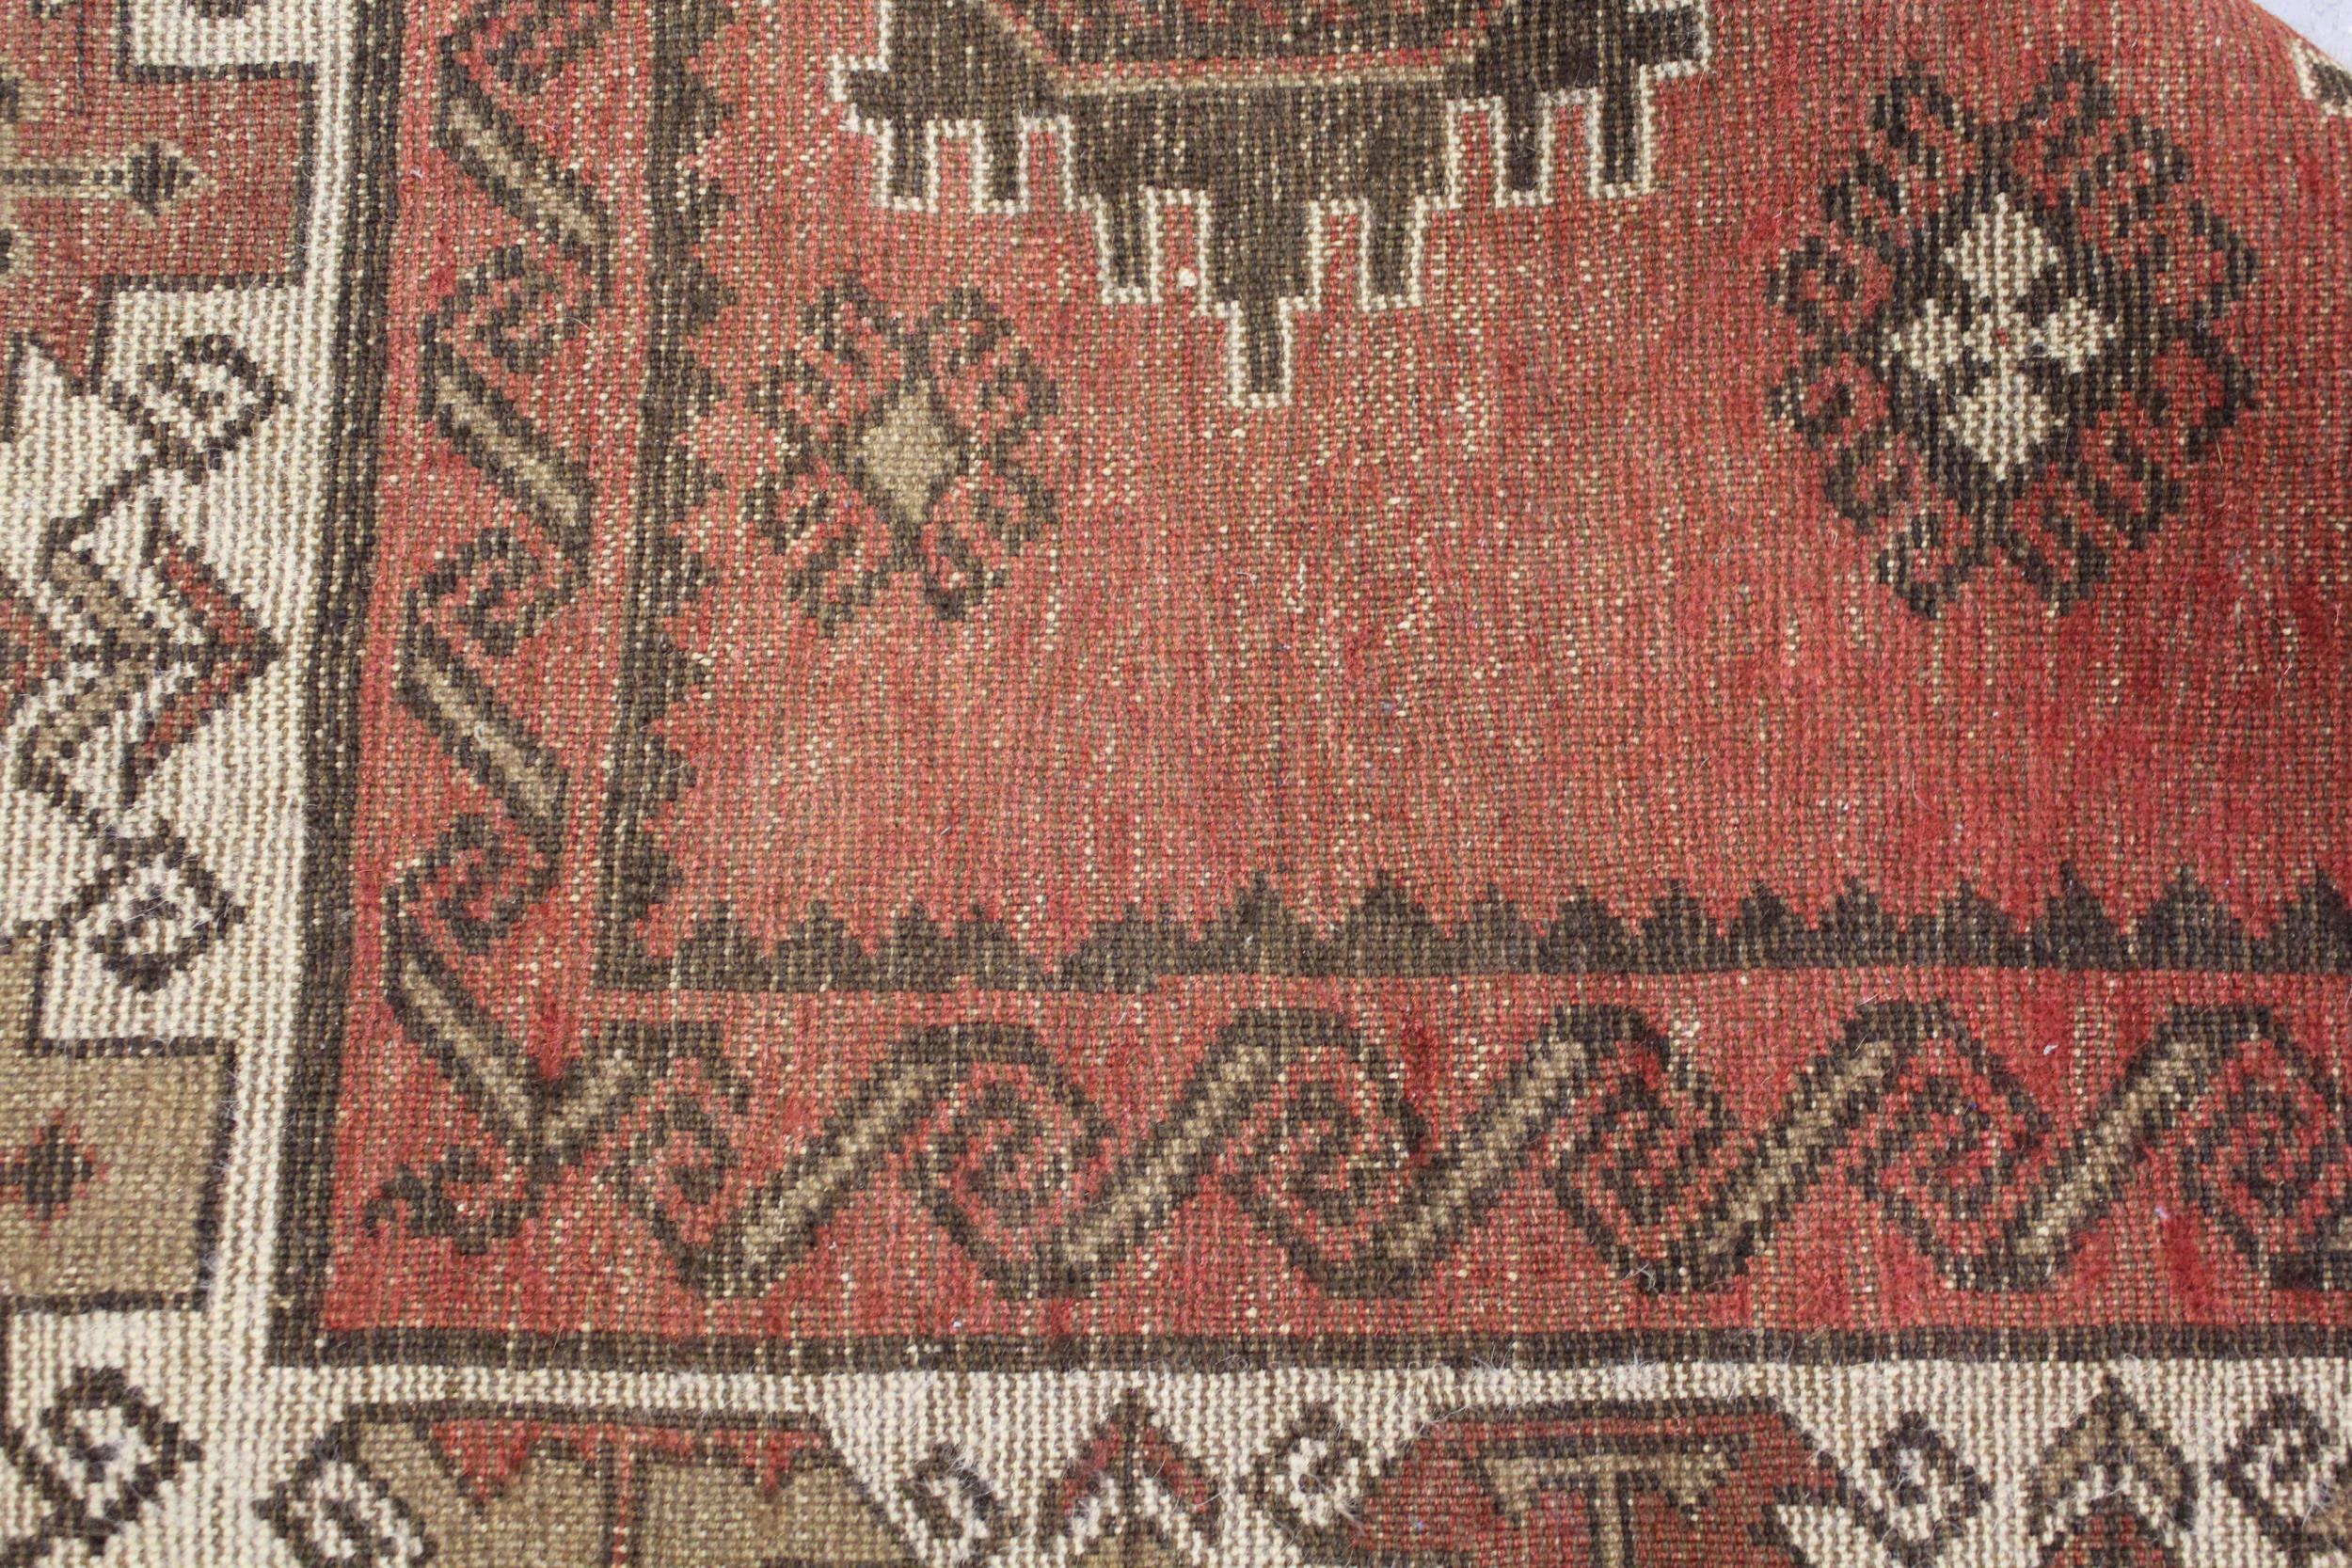 Small Afghan rug with an all over stylised floral design, in shades of beige and brown, 5ft4ins x - Image 3 of 3